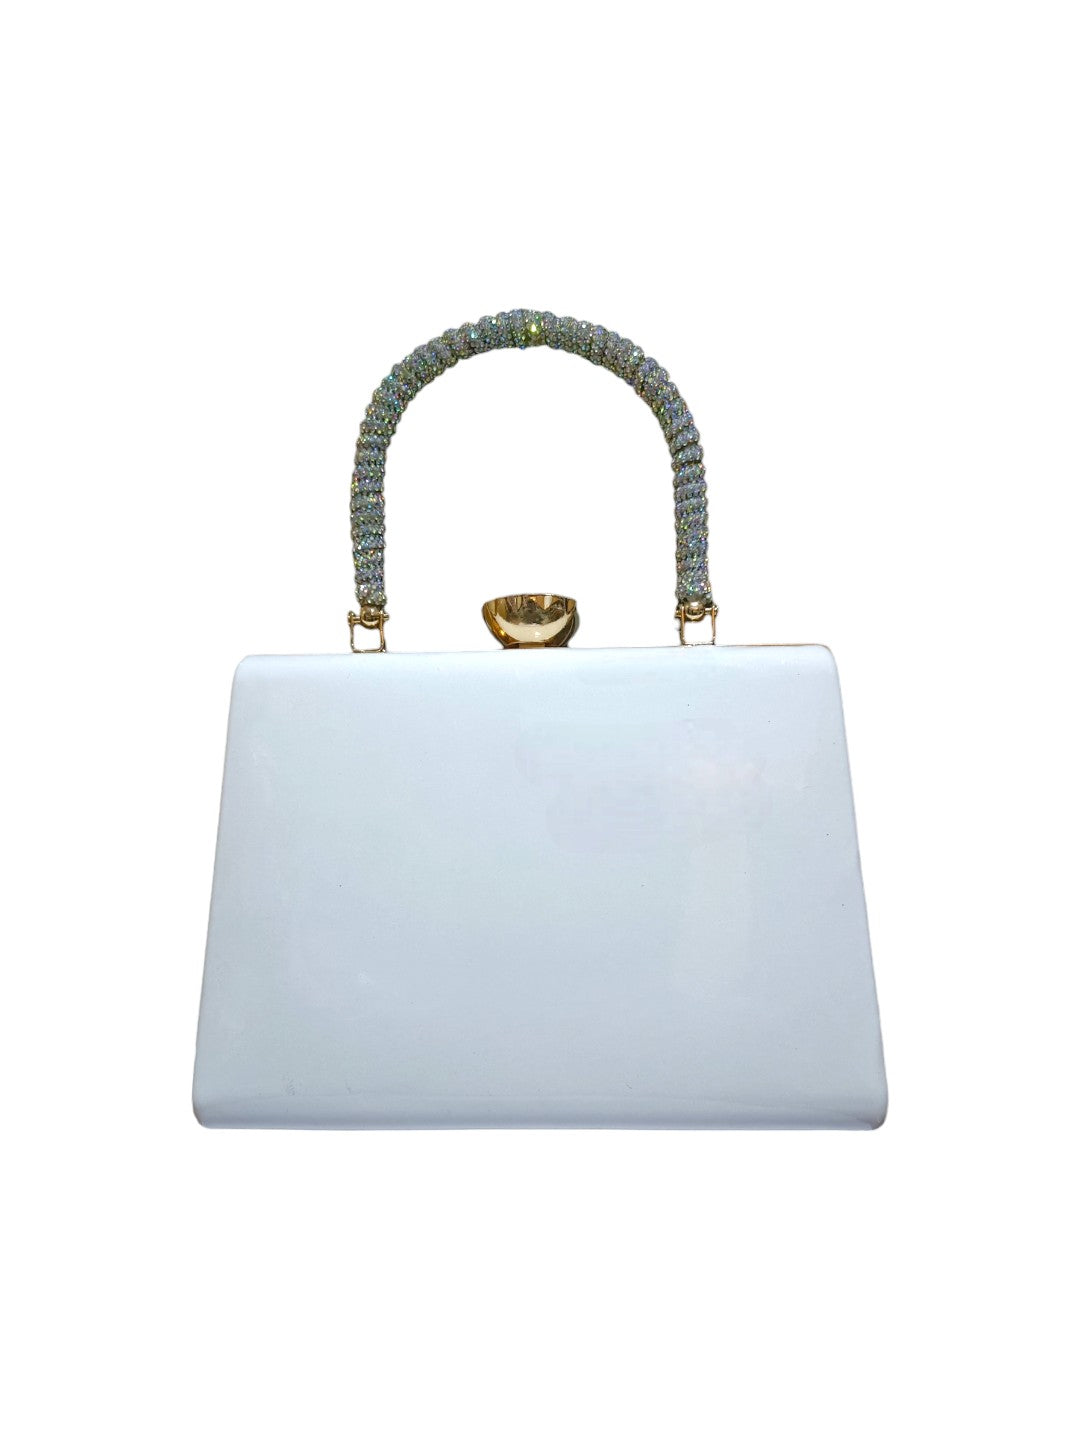 A Vdesi handle clutch for ladies. 